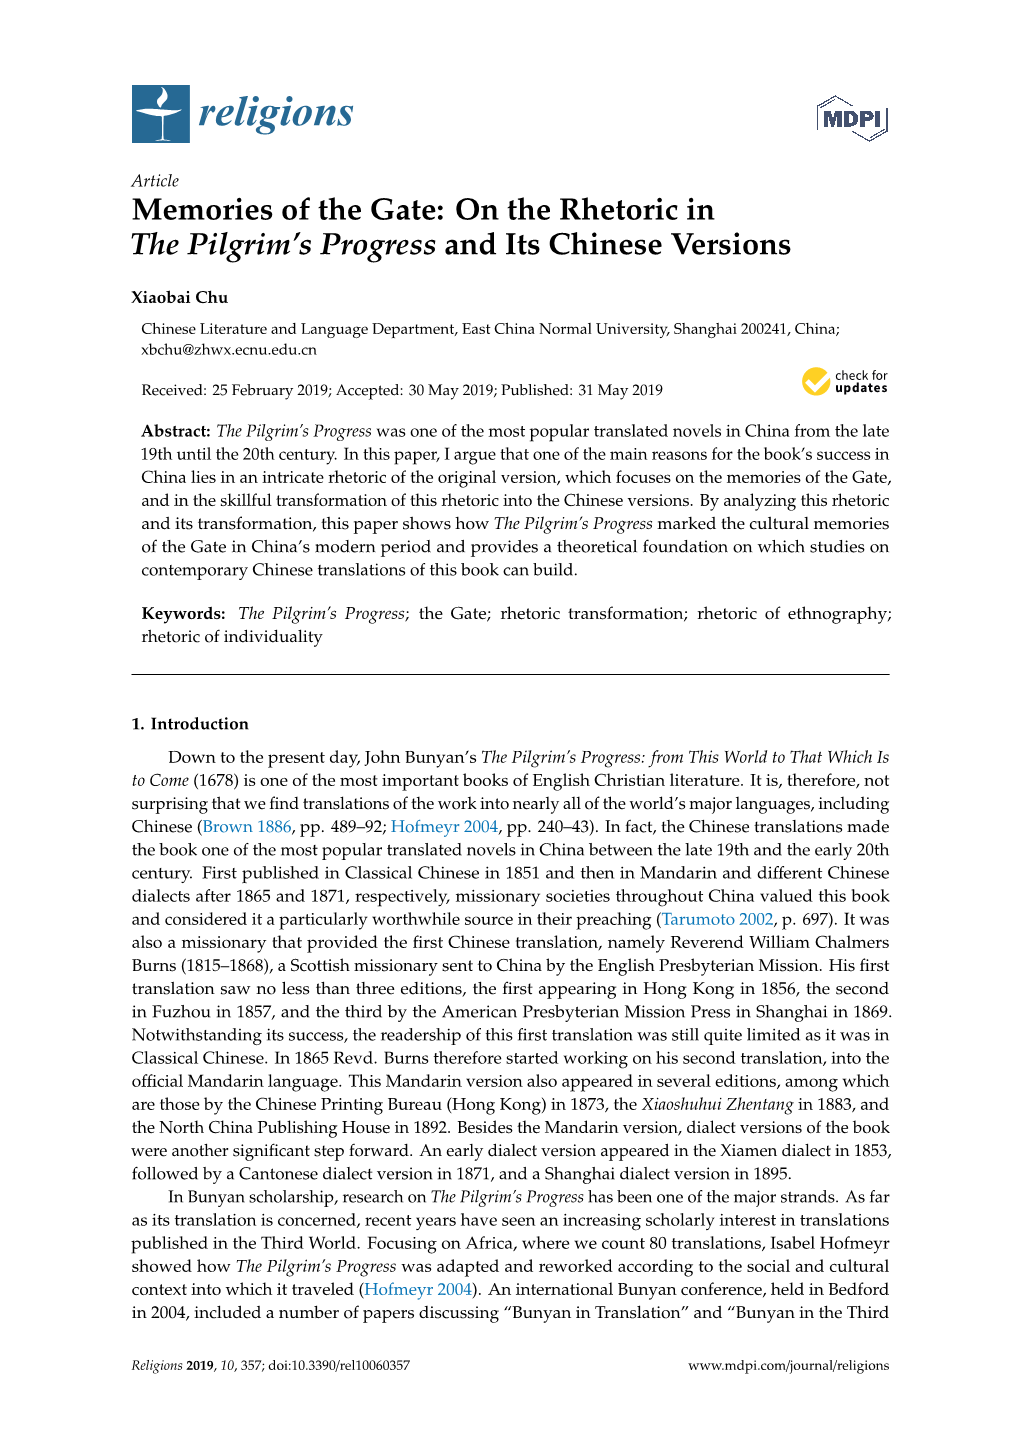 On the Rhetoric in the Pilgrim's Progress and Its Chinese